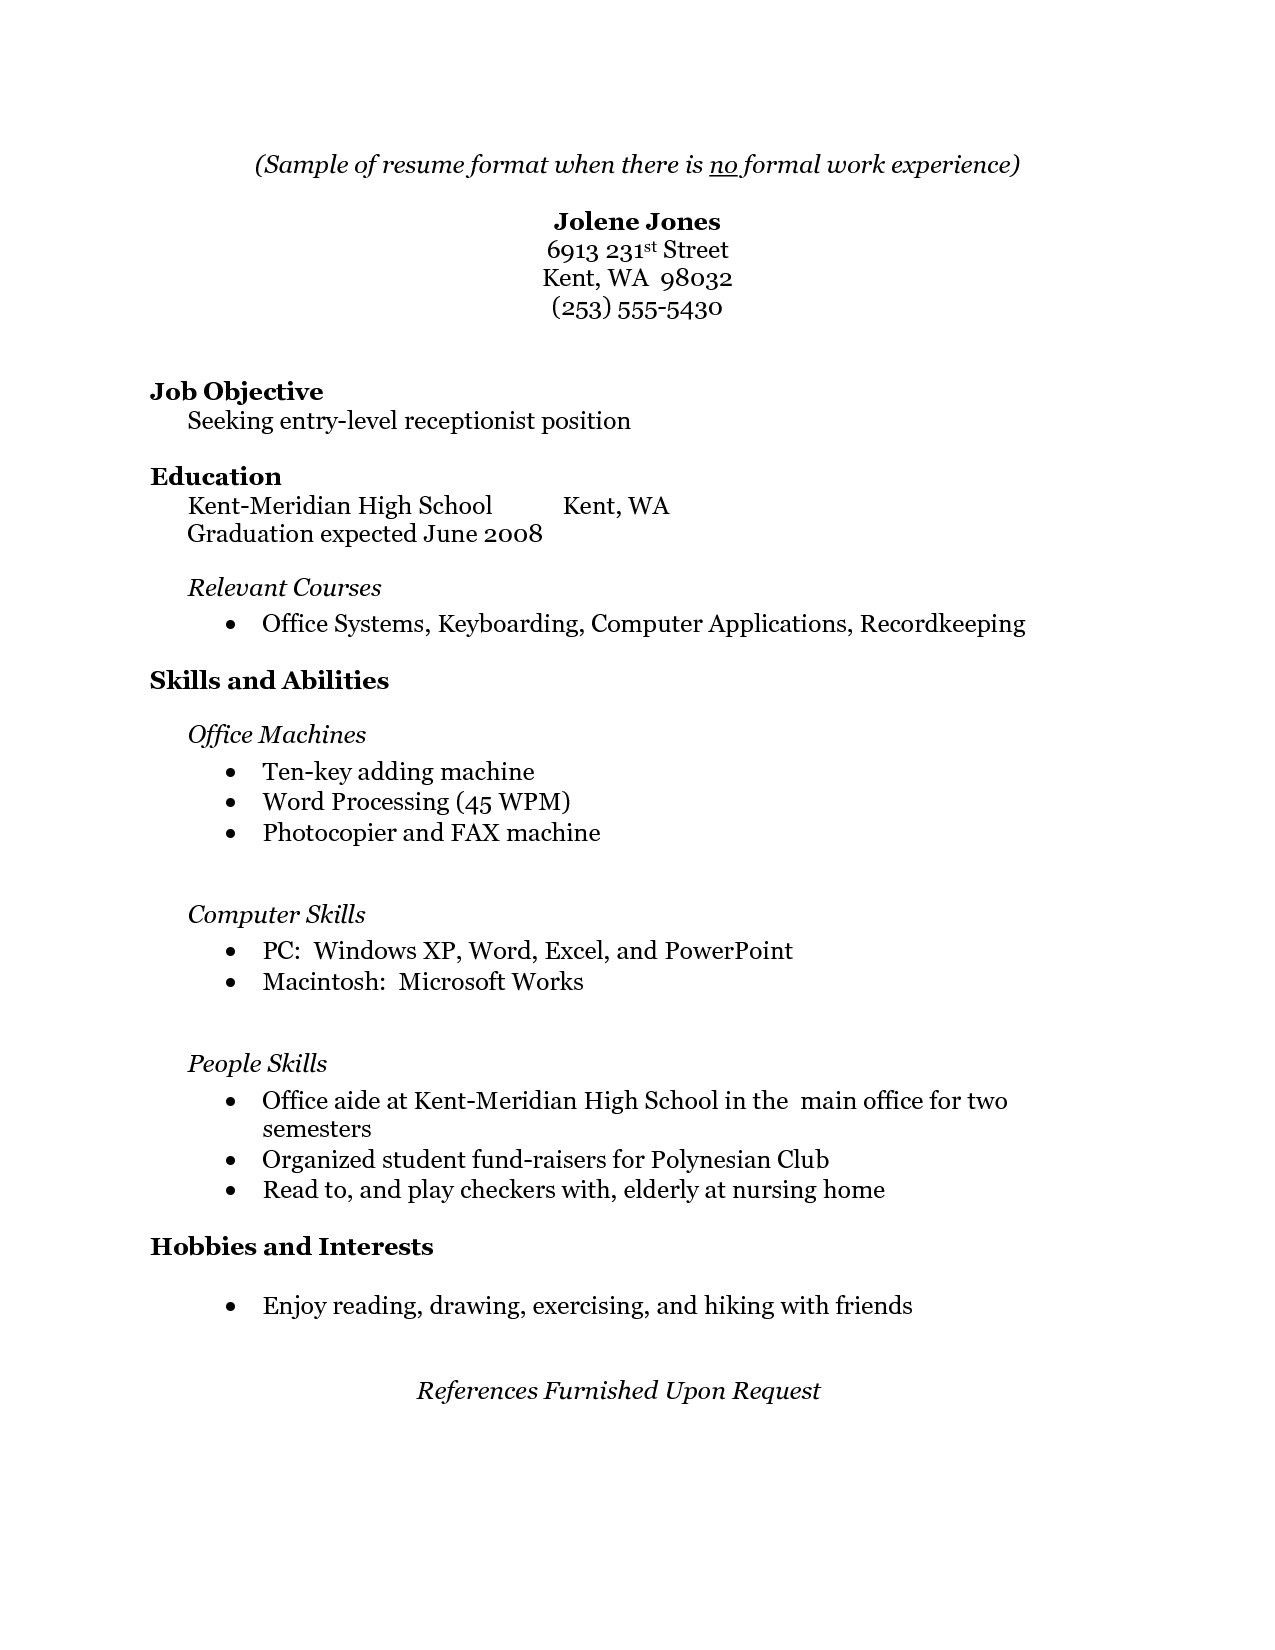 Resume Templates for Little Job Experience Free Resume Templates No Work Experience #experience …